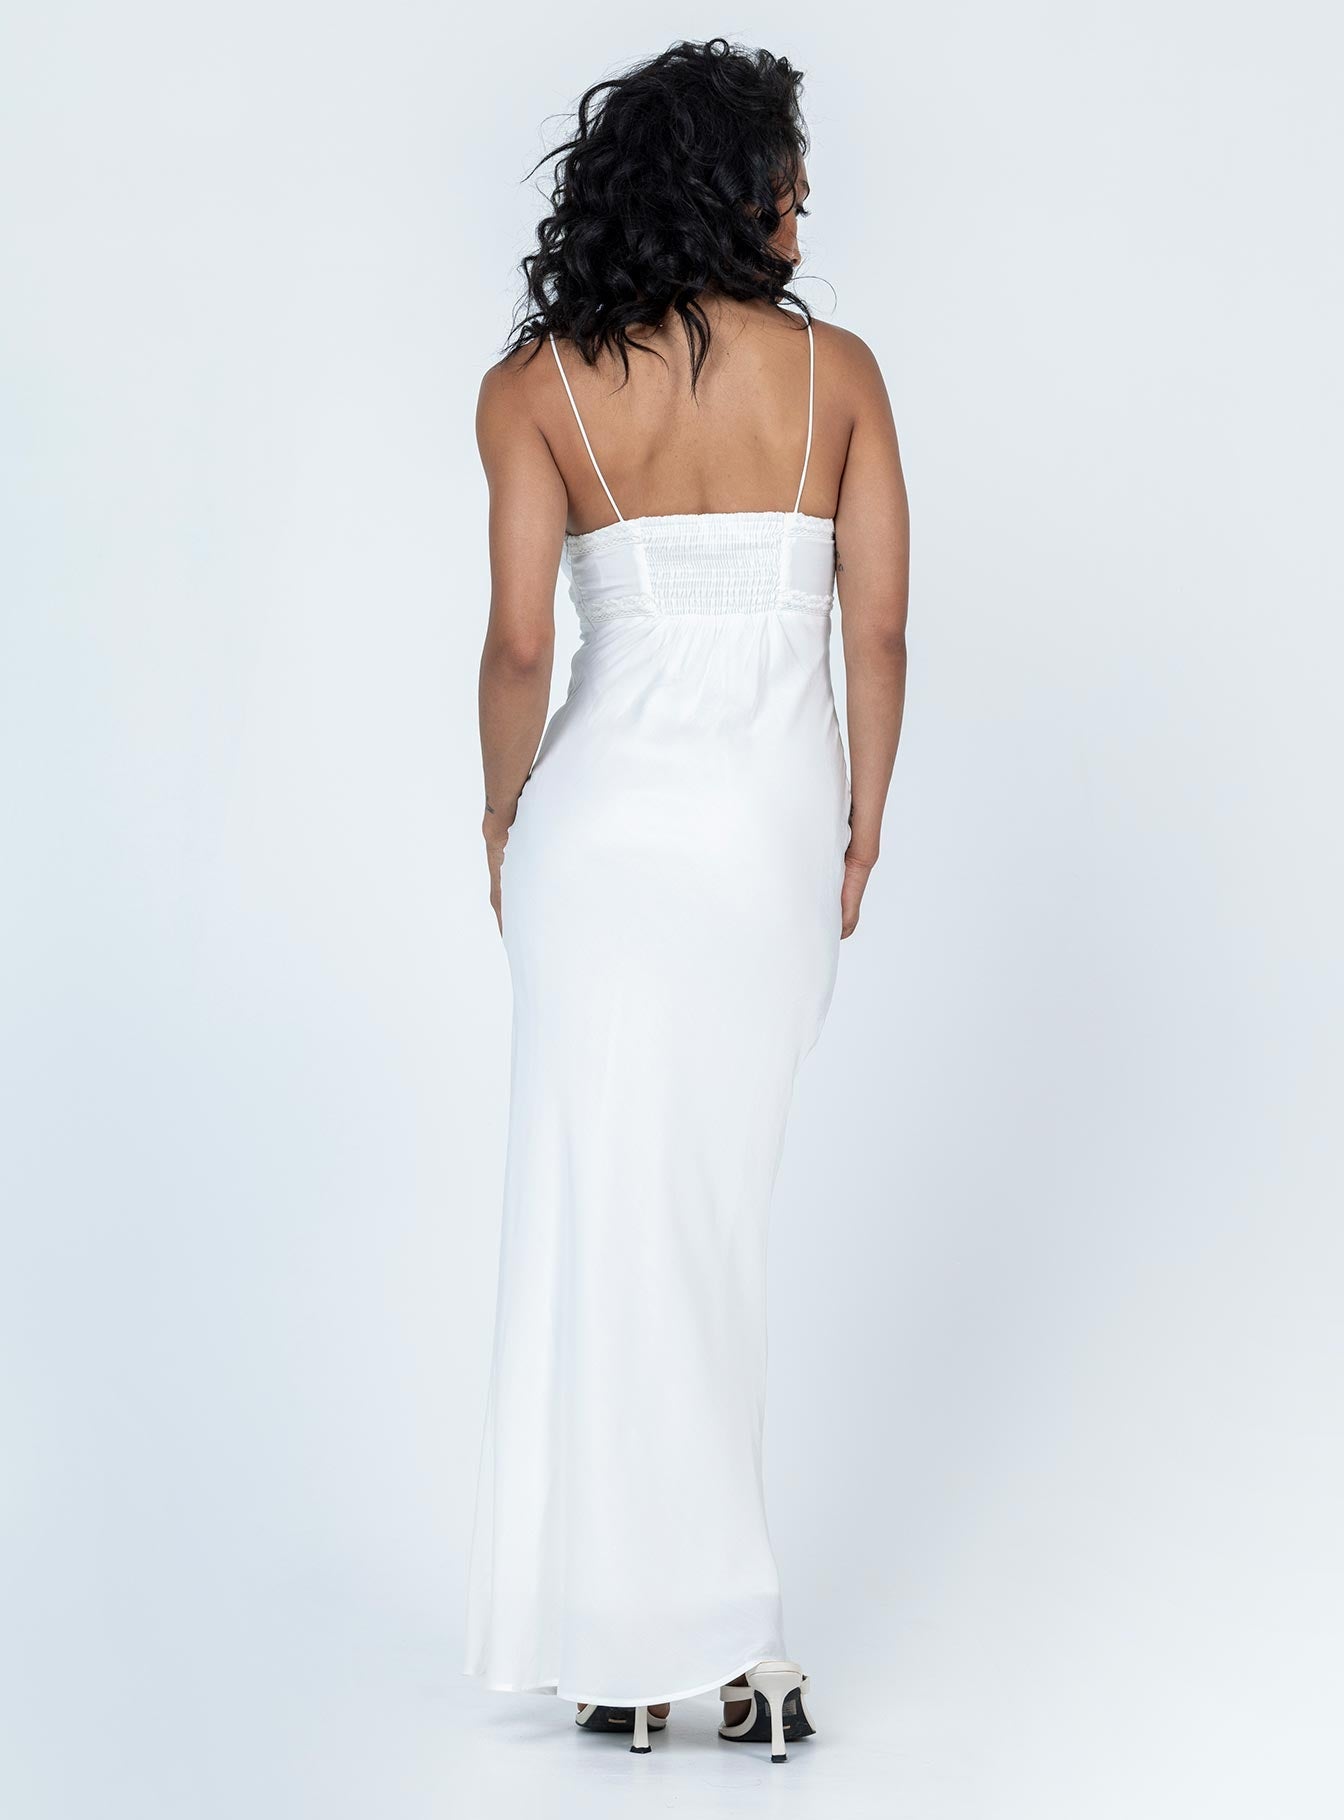 Shop Formal Dress - Emily Maxi Dress White featured image